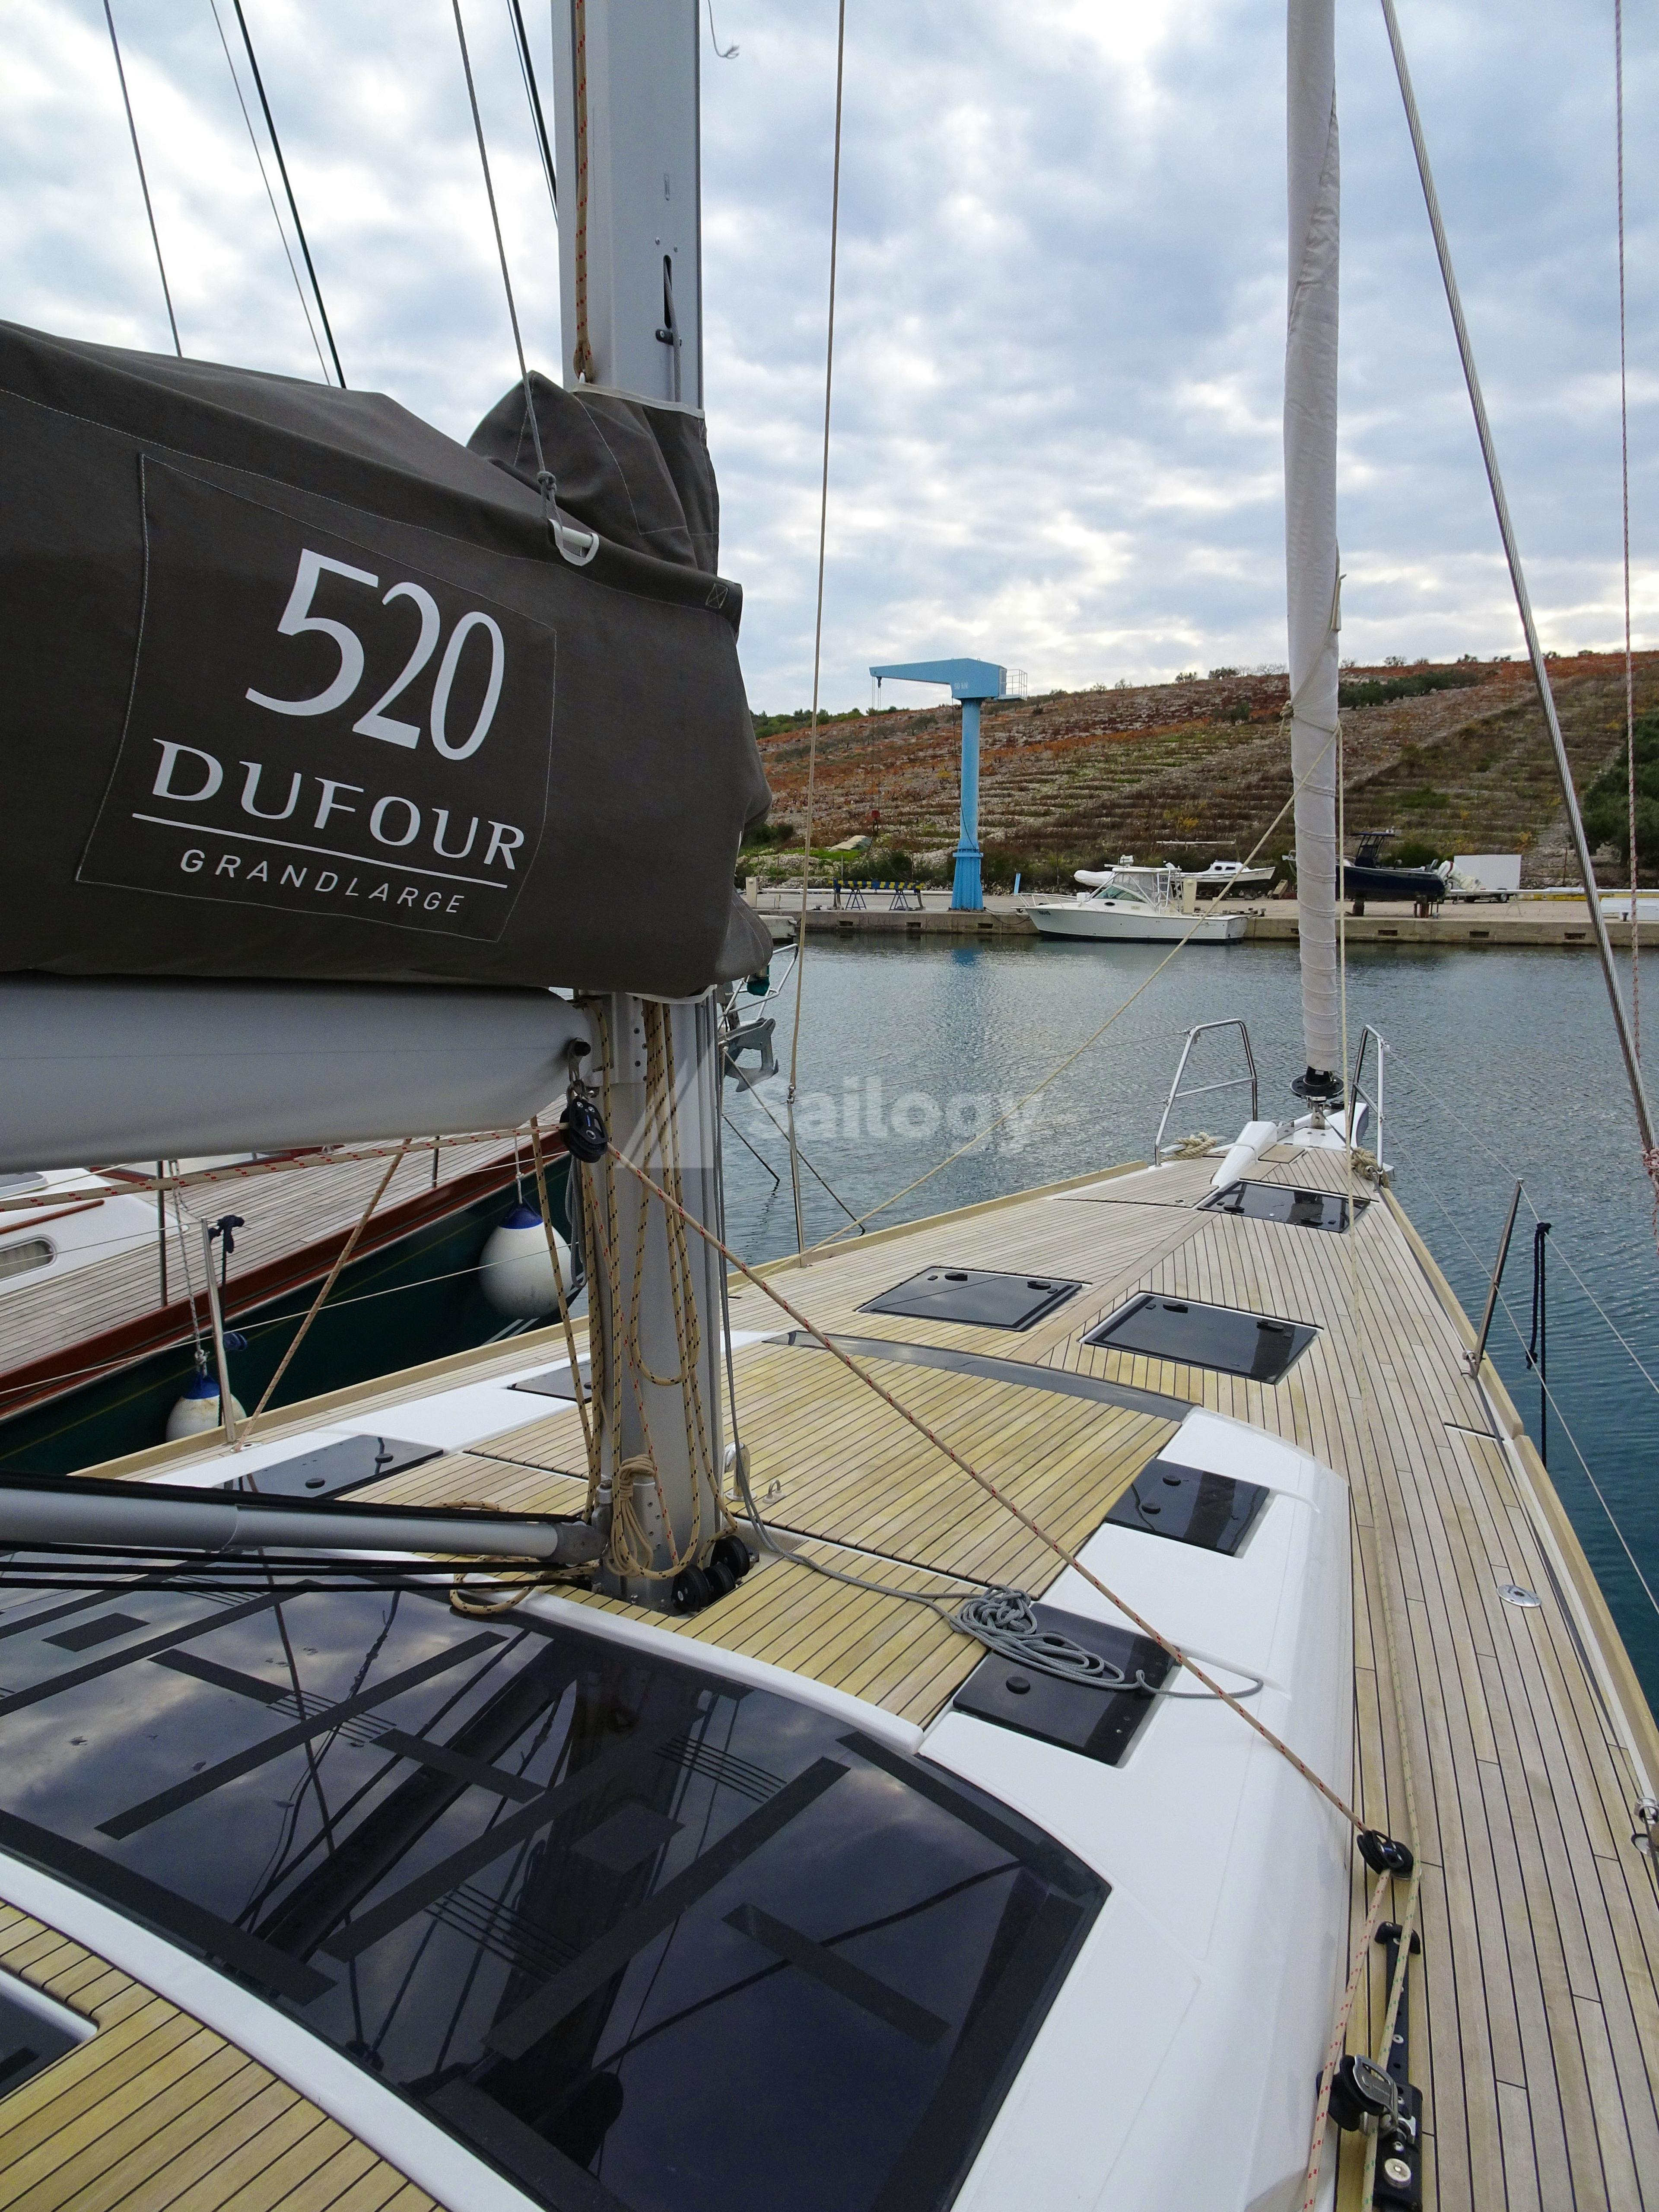 Dufour 520 Grand Large